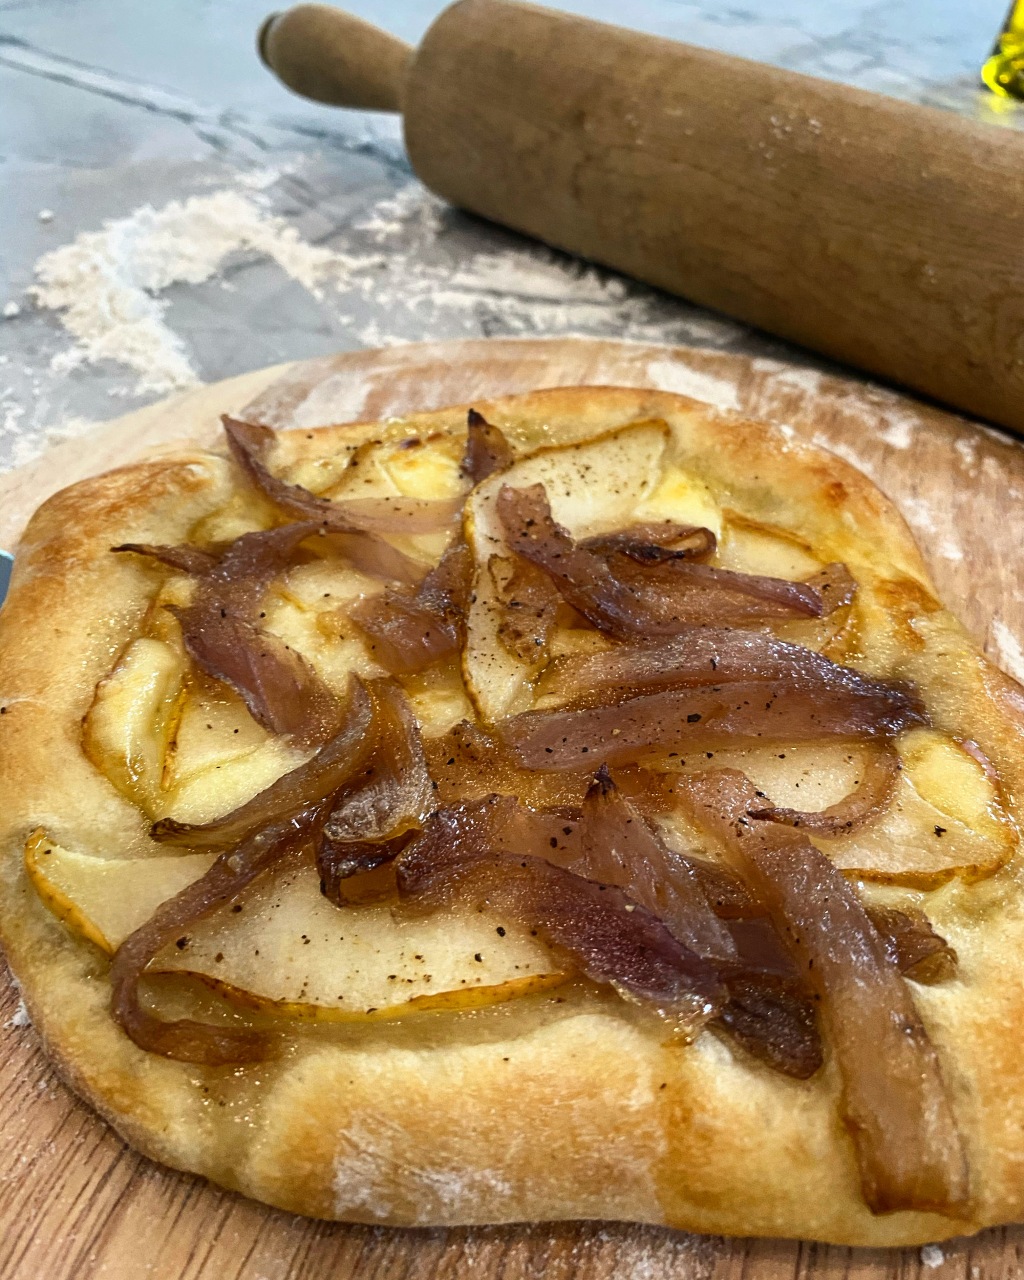 Brie, Pear and Caramelized Onion